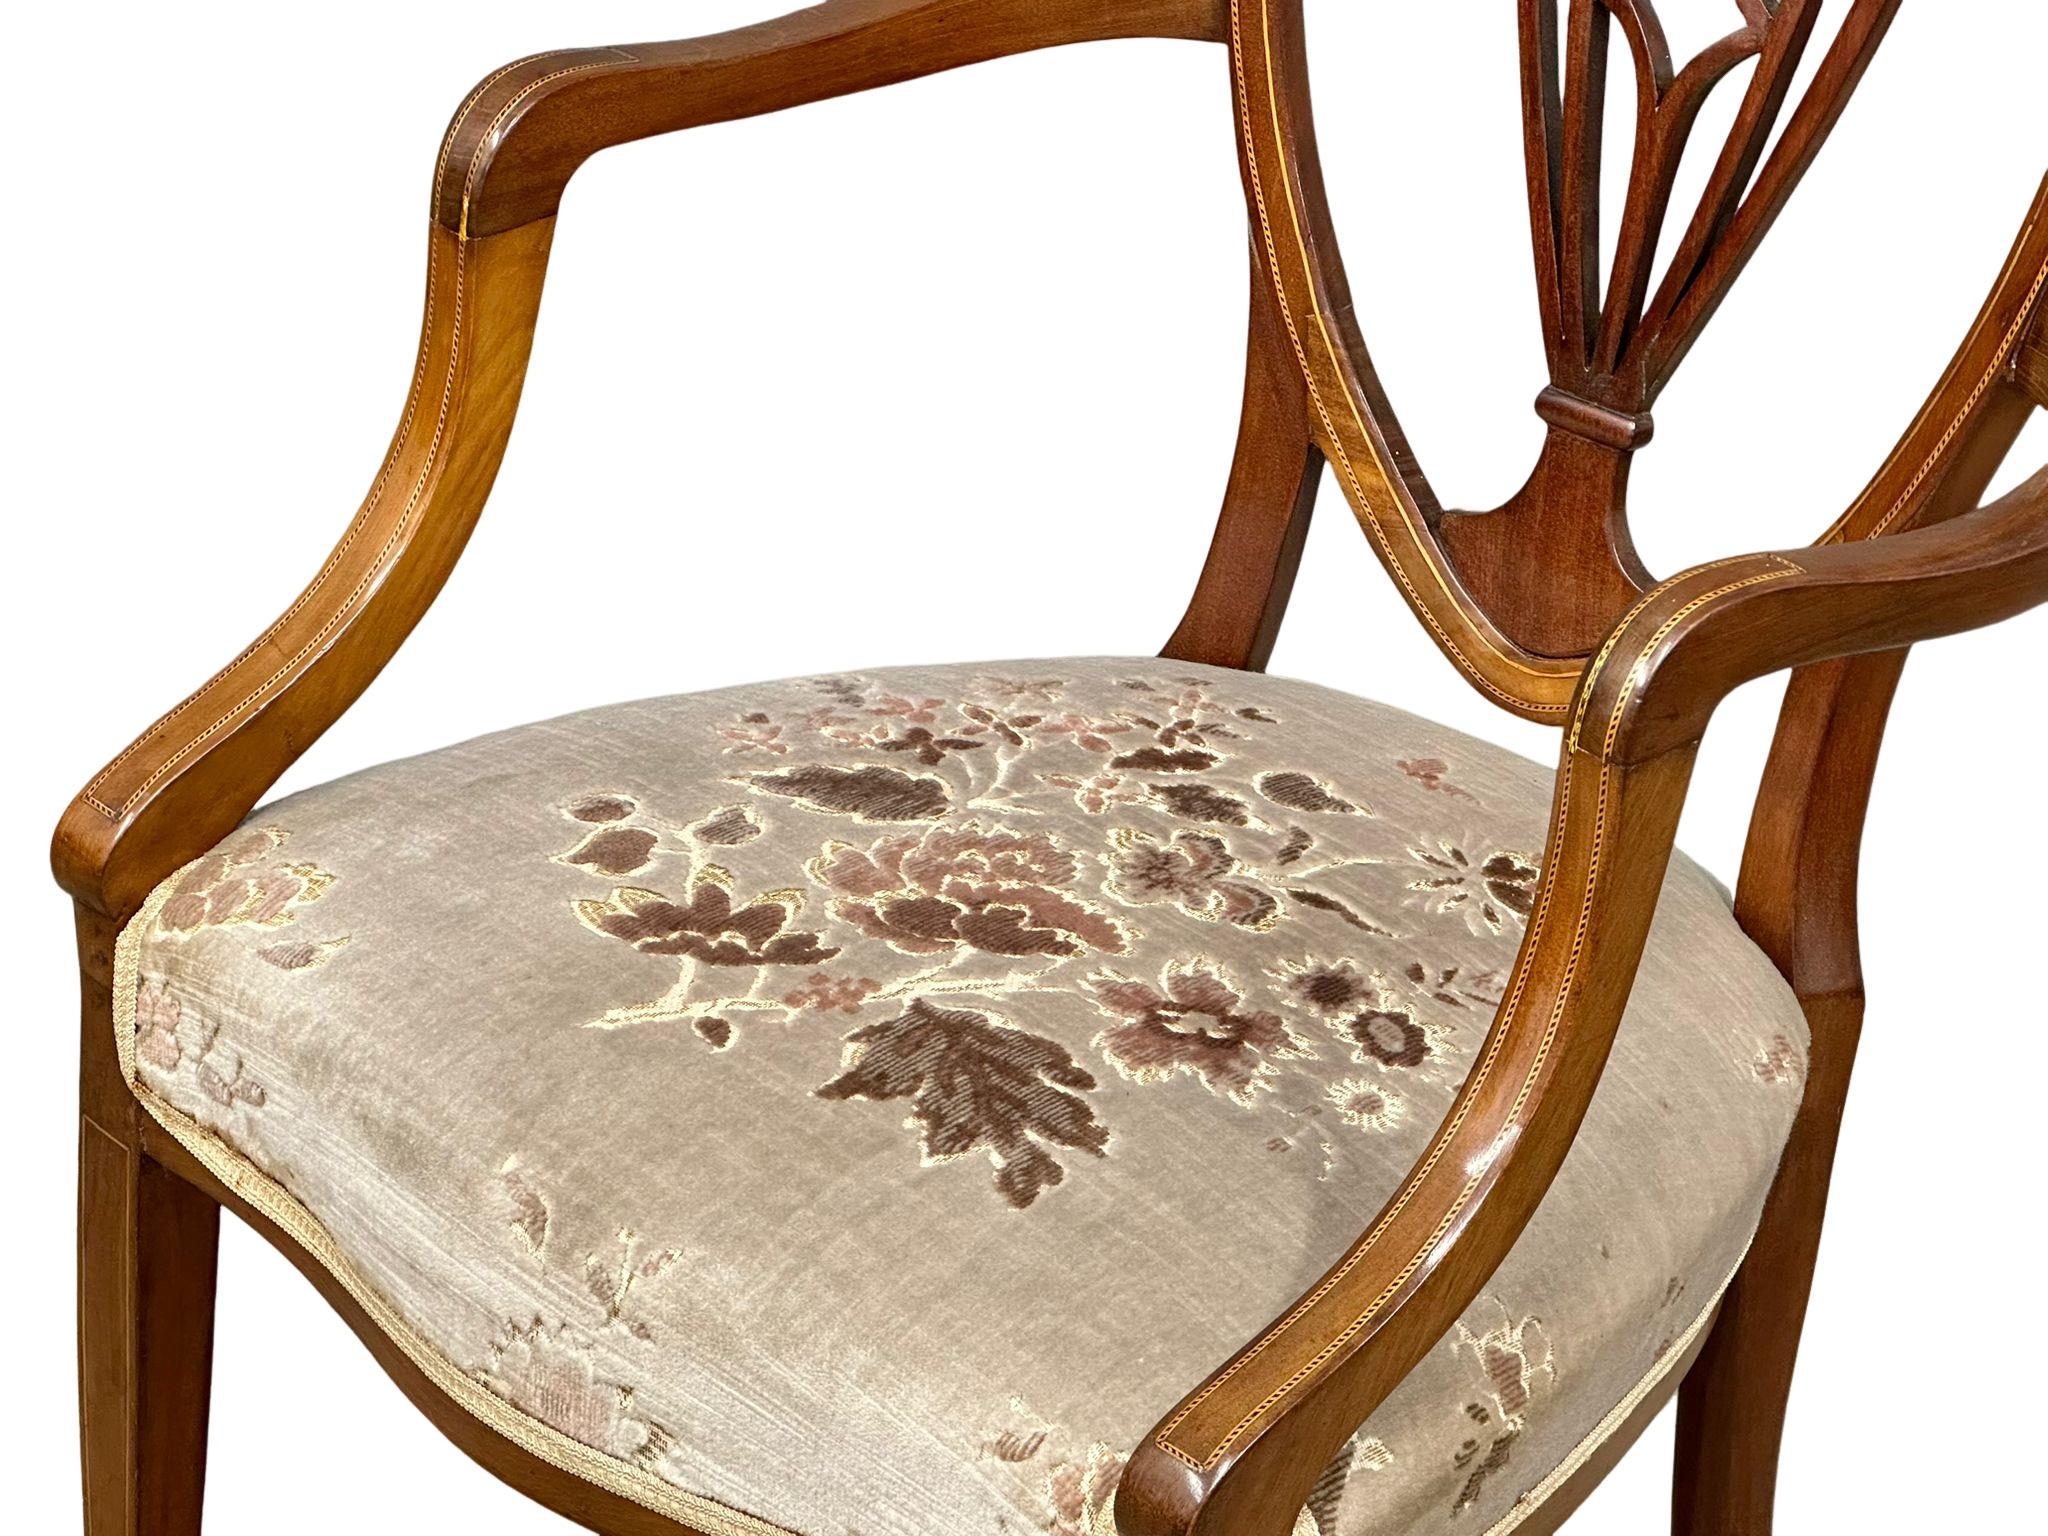 A good quality early 20th century Sheraton Revival inlaid mahogany armchair. Circa 1900-1910(3) - Image 4 of 5